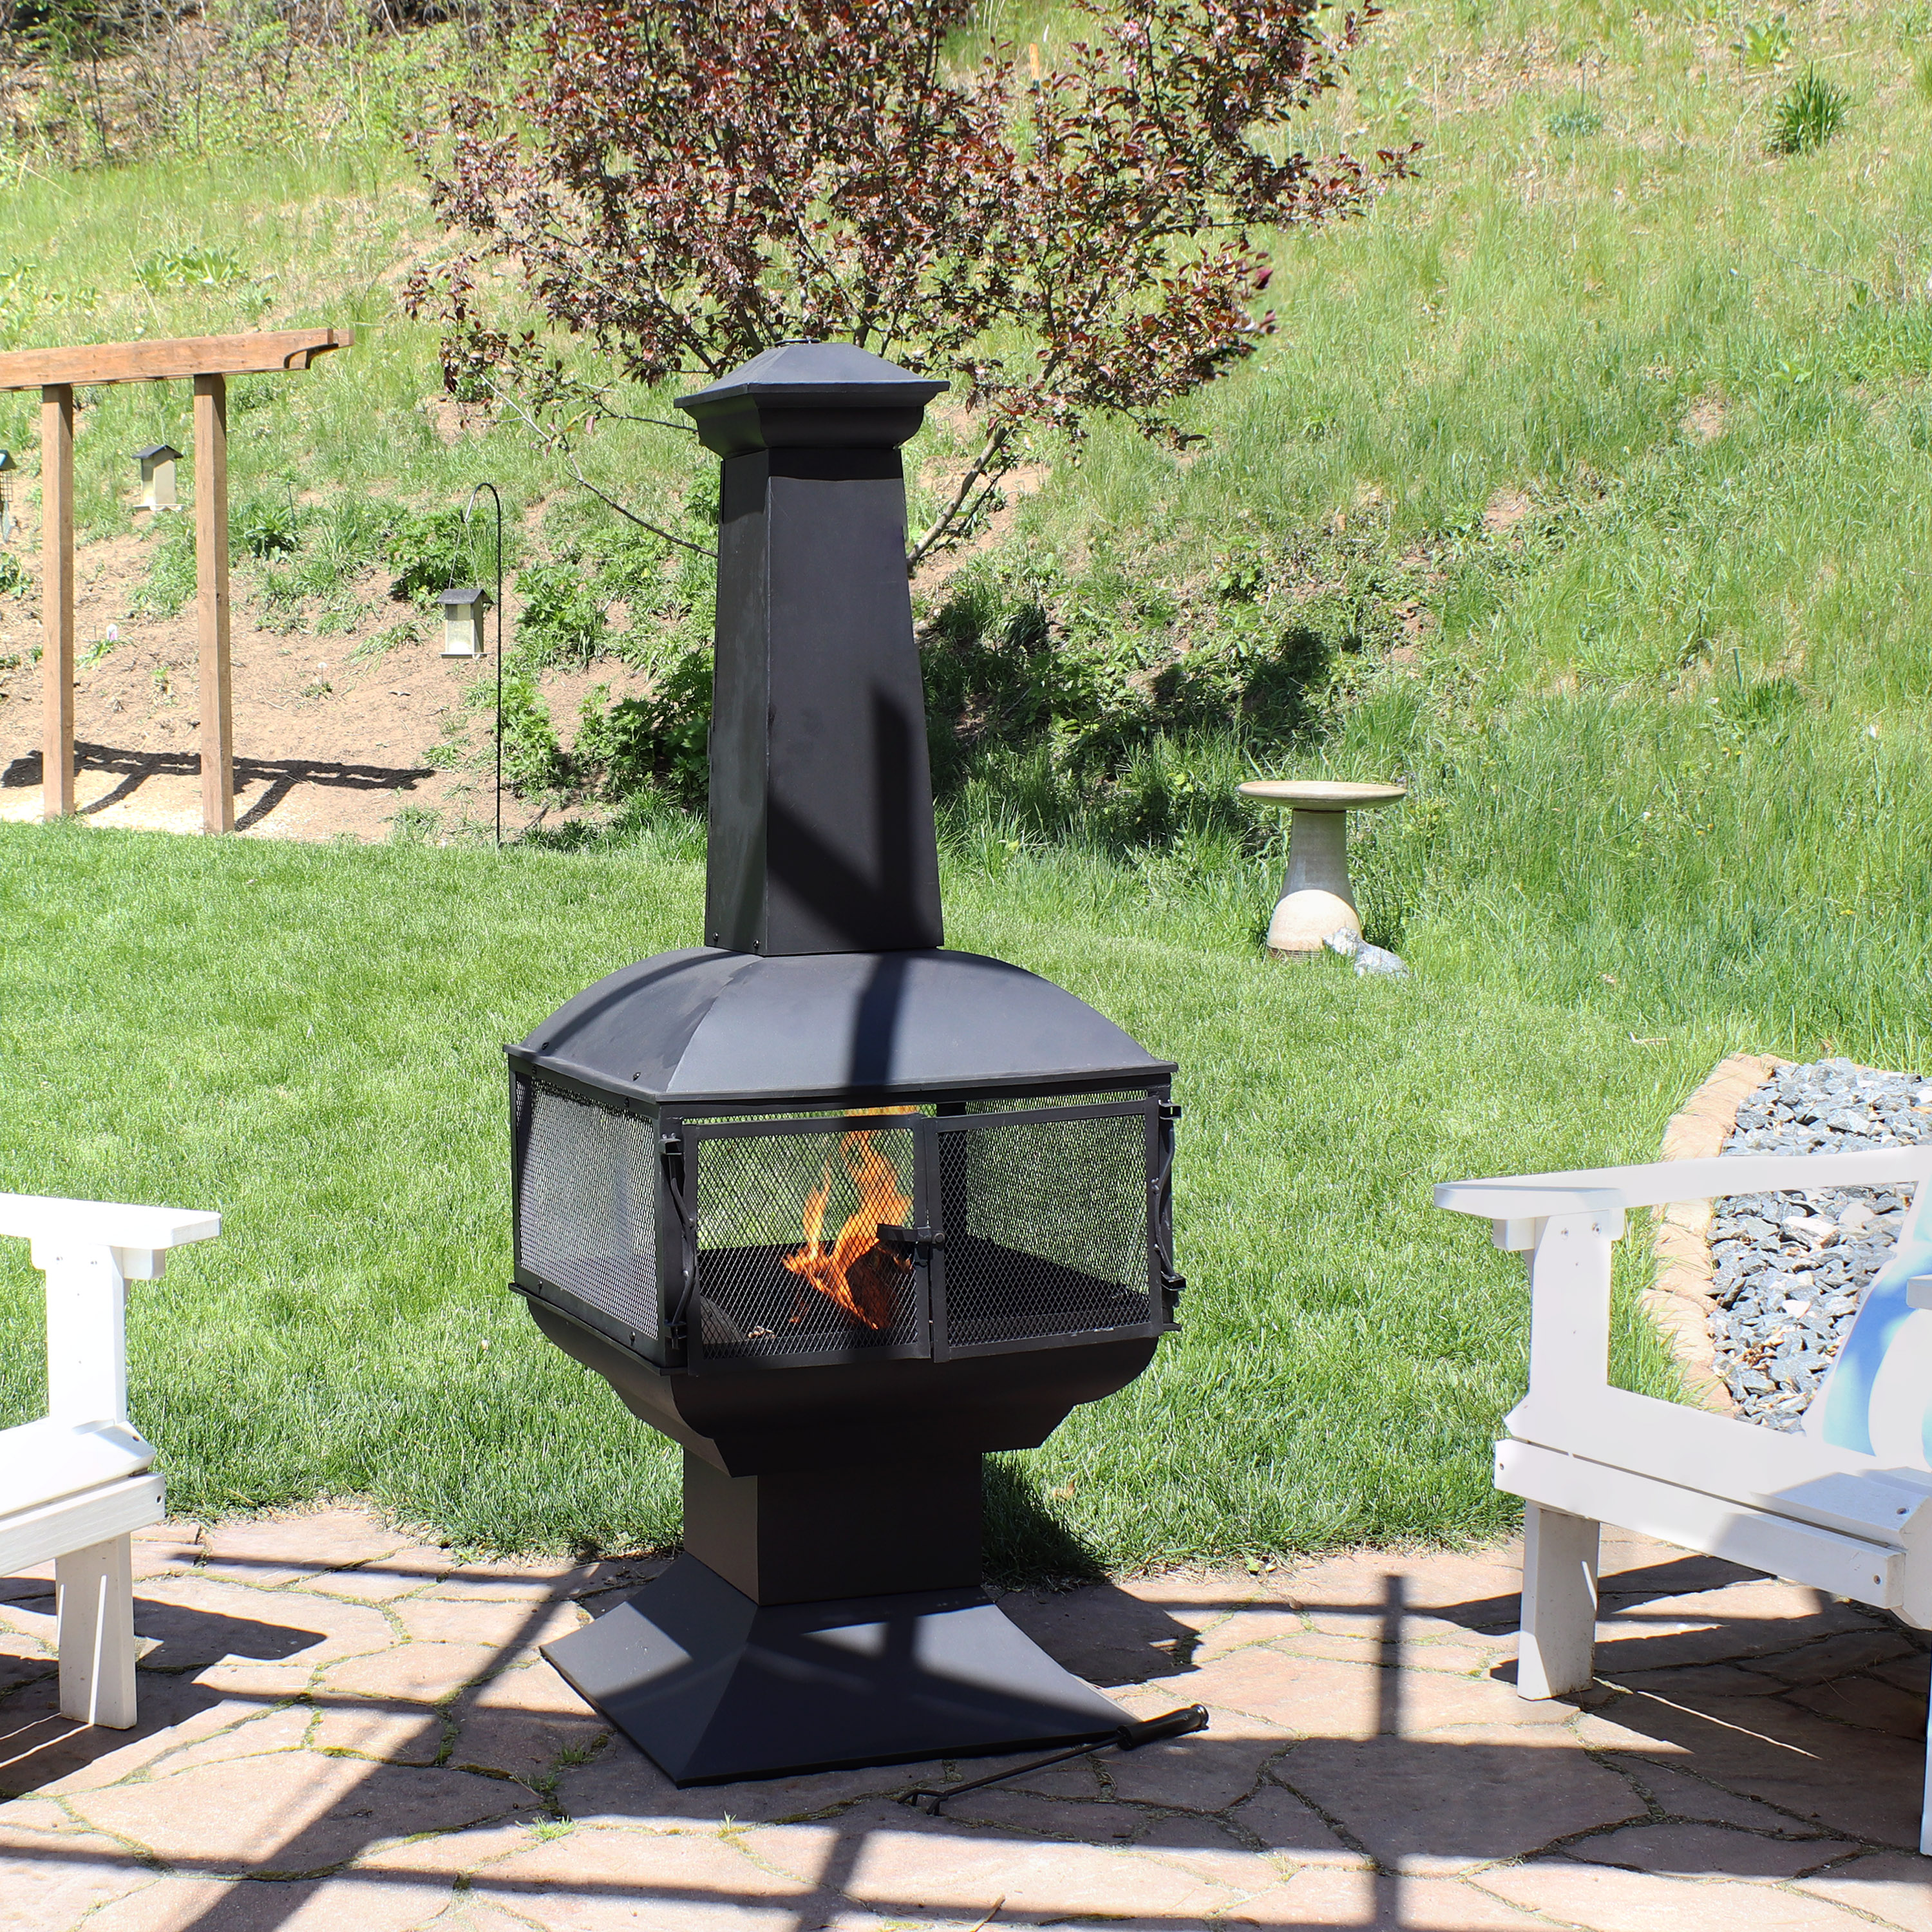 Steel Chimenea Chiminea Patio Heater and Barbeque BBQ Combi Fire Pit Fire Basket 